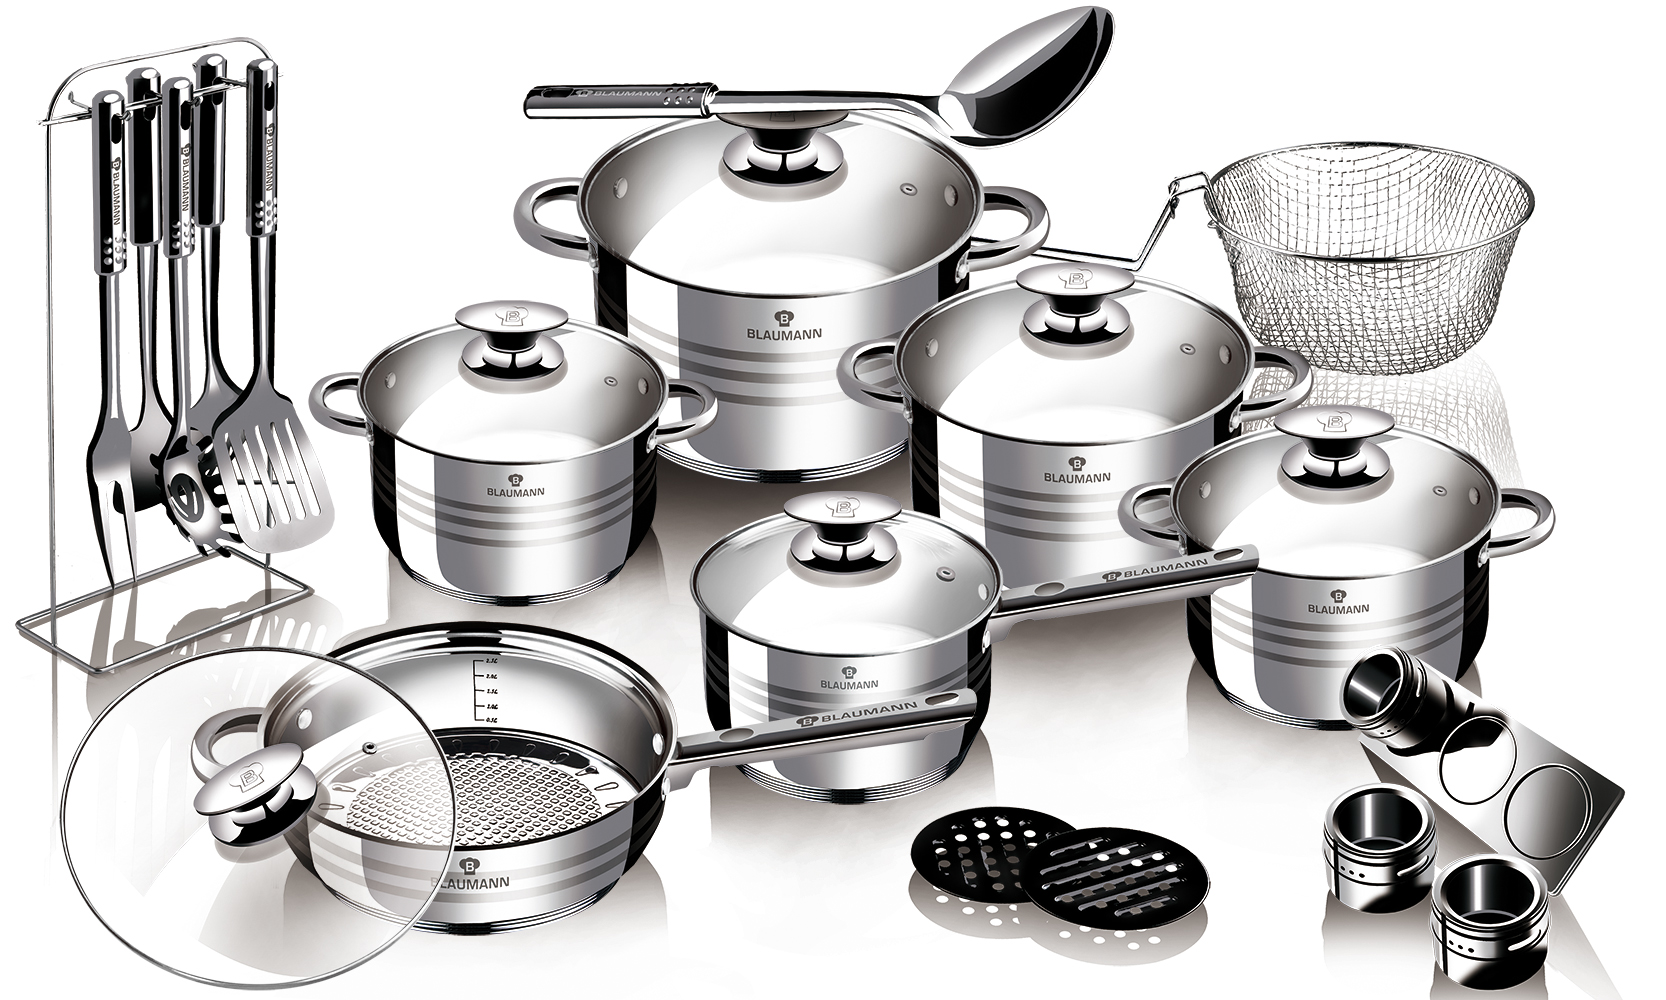 Blaumann – Cookware, Bakeware, Kitchenware – for kitchen and home